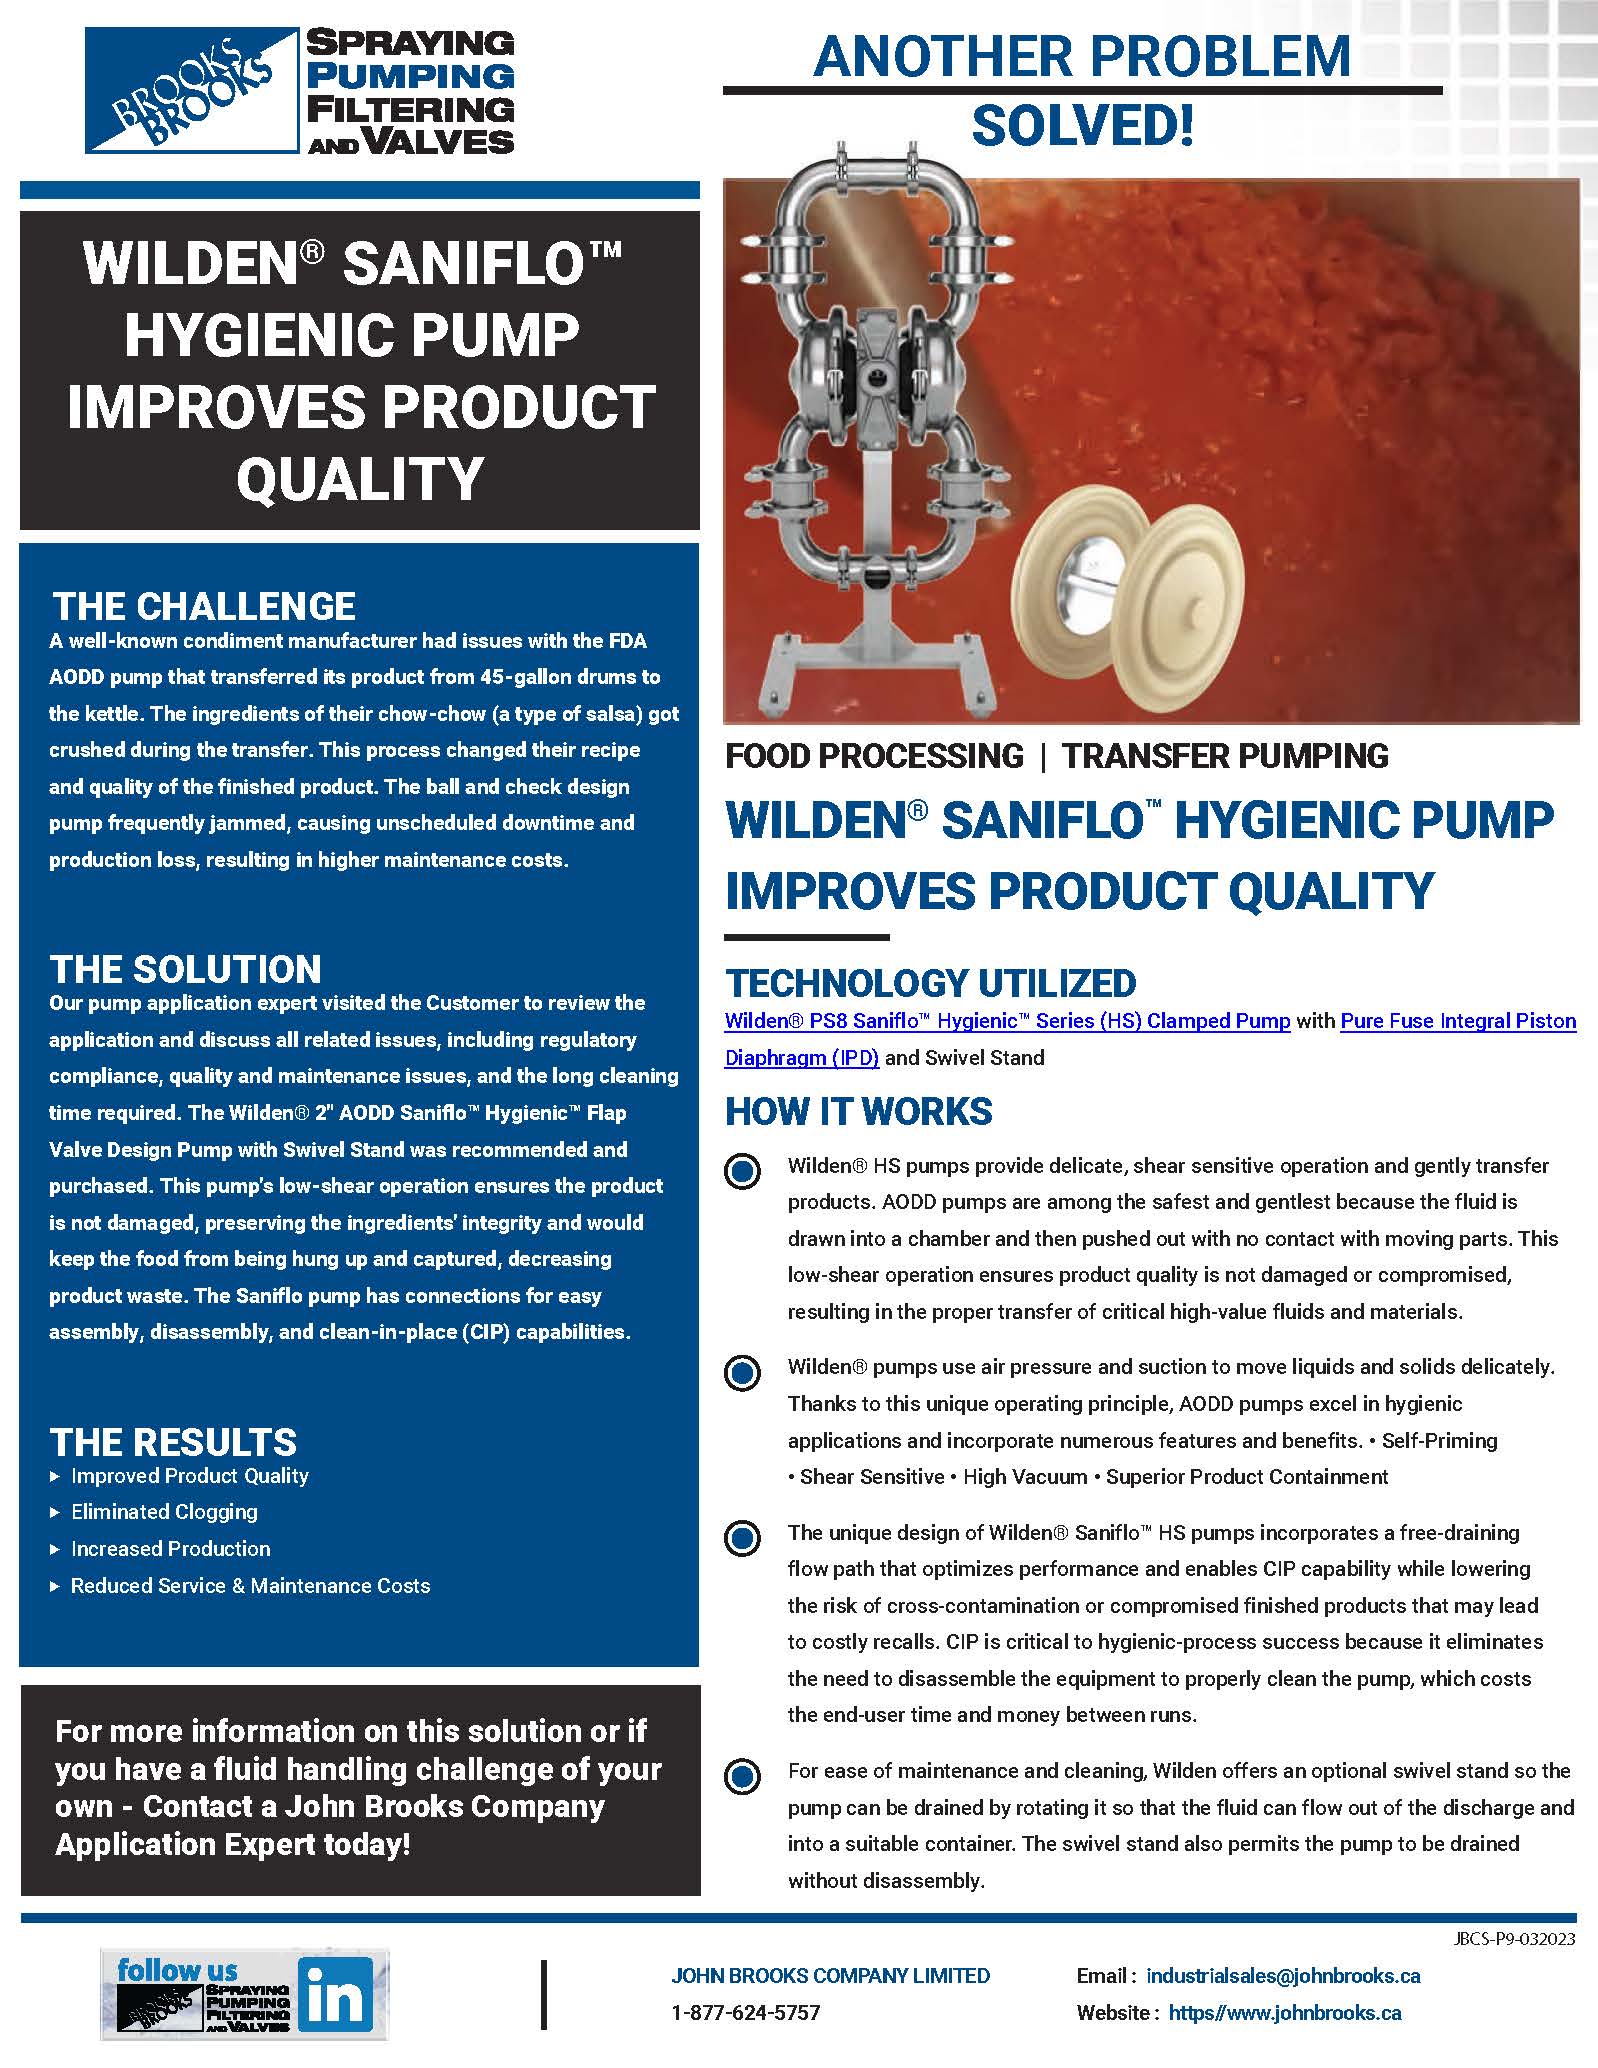 Wilden Hygienic Pump Improves Product Quality